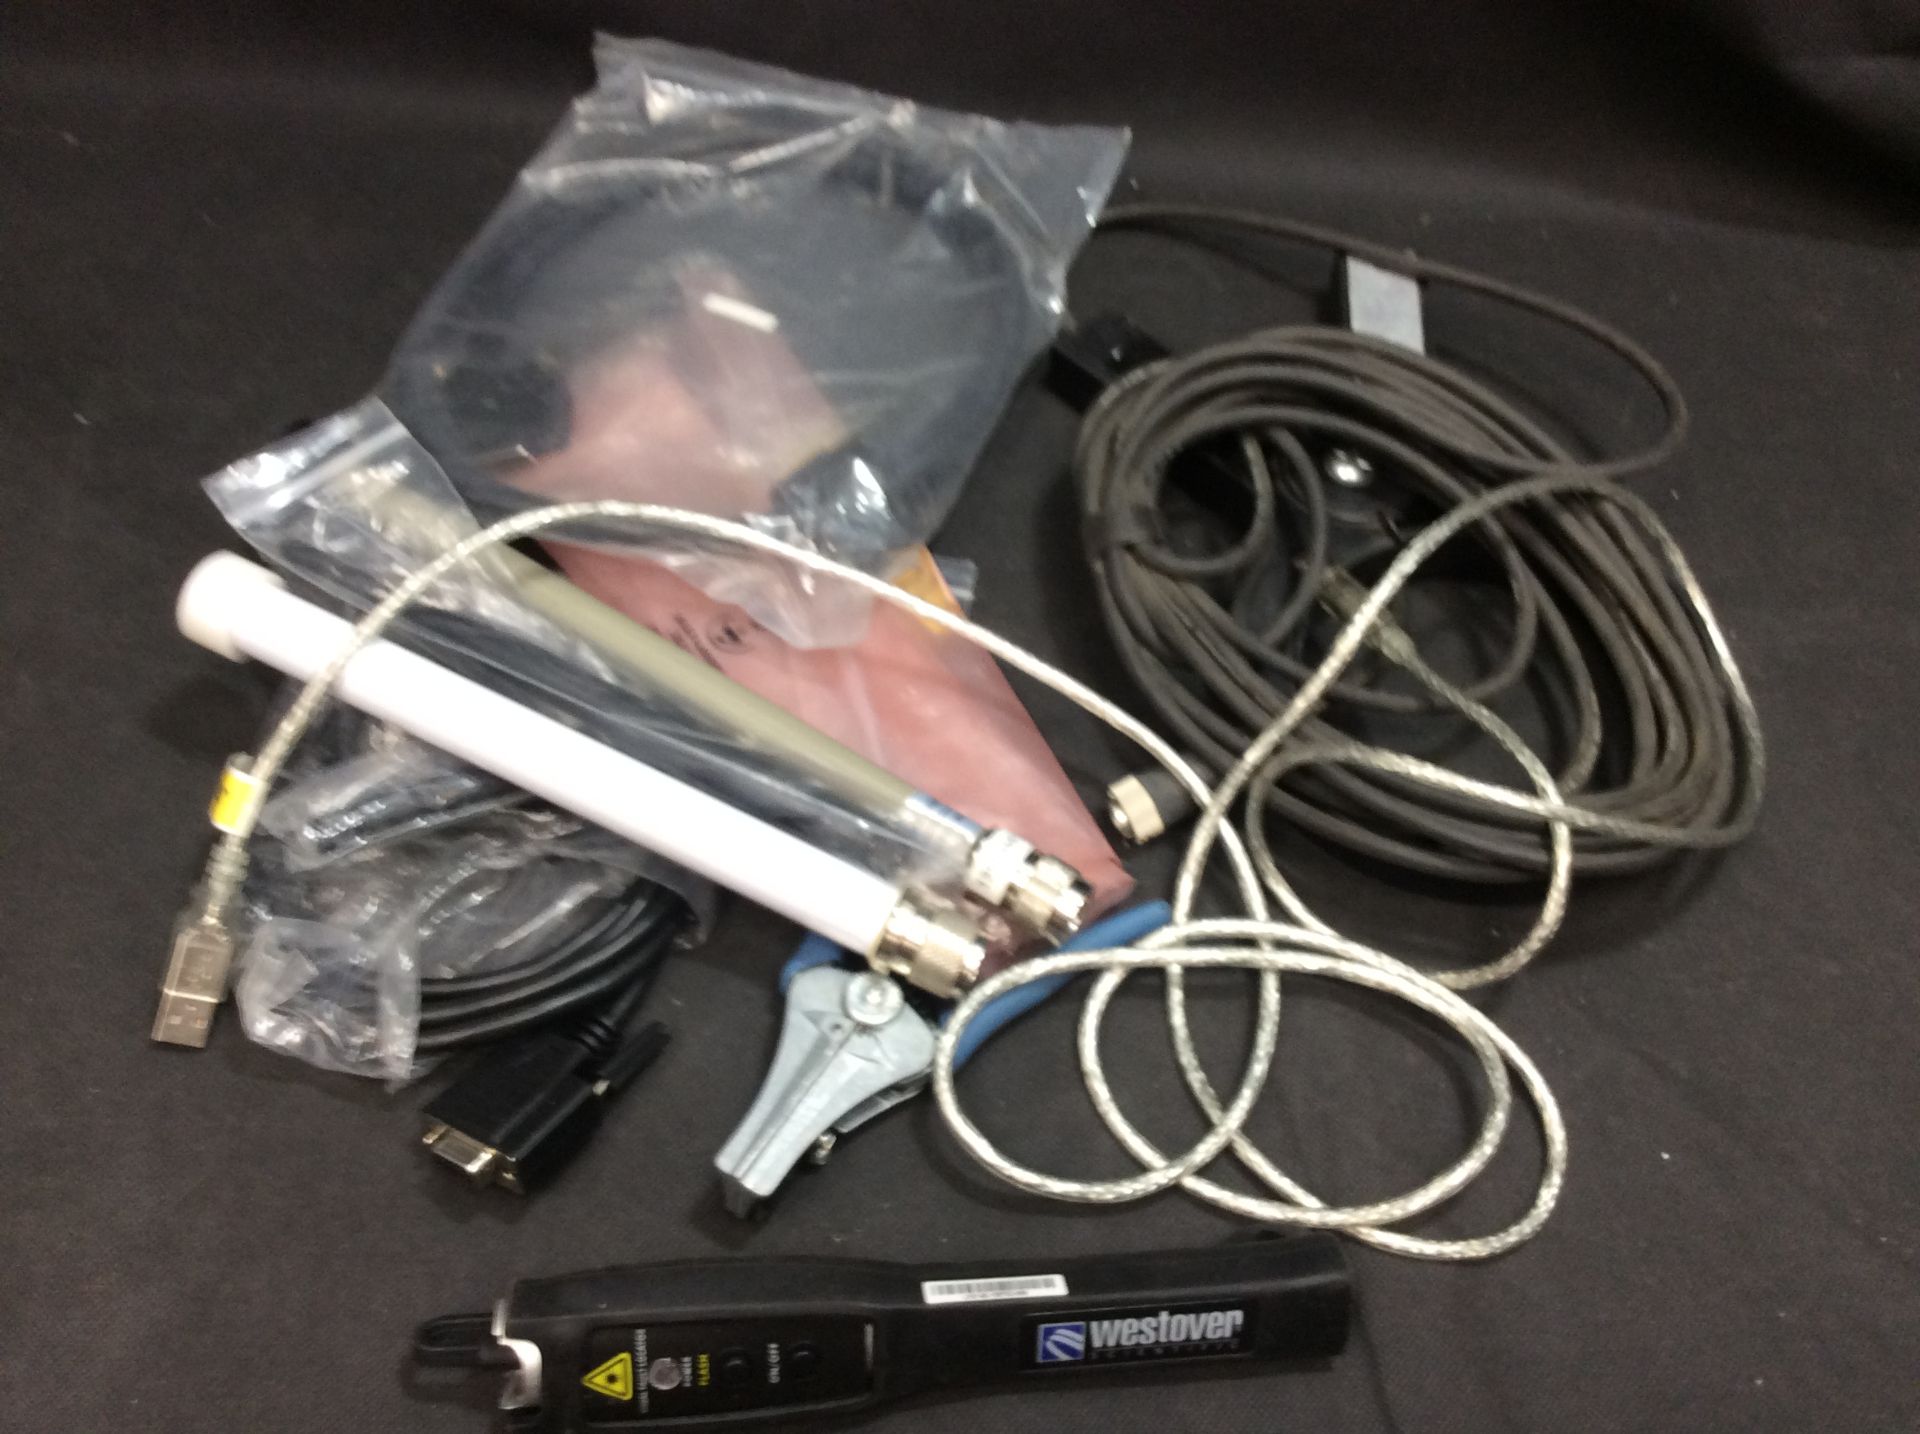 Bag of Mixed Items Incl Ideal L-5620 Stripmaste, Hi-Speed USB Cable, Westover Scientific Laser ect